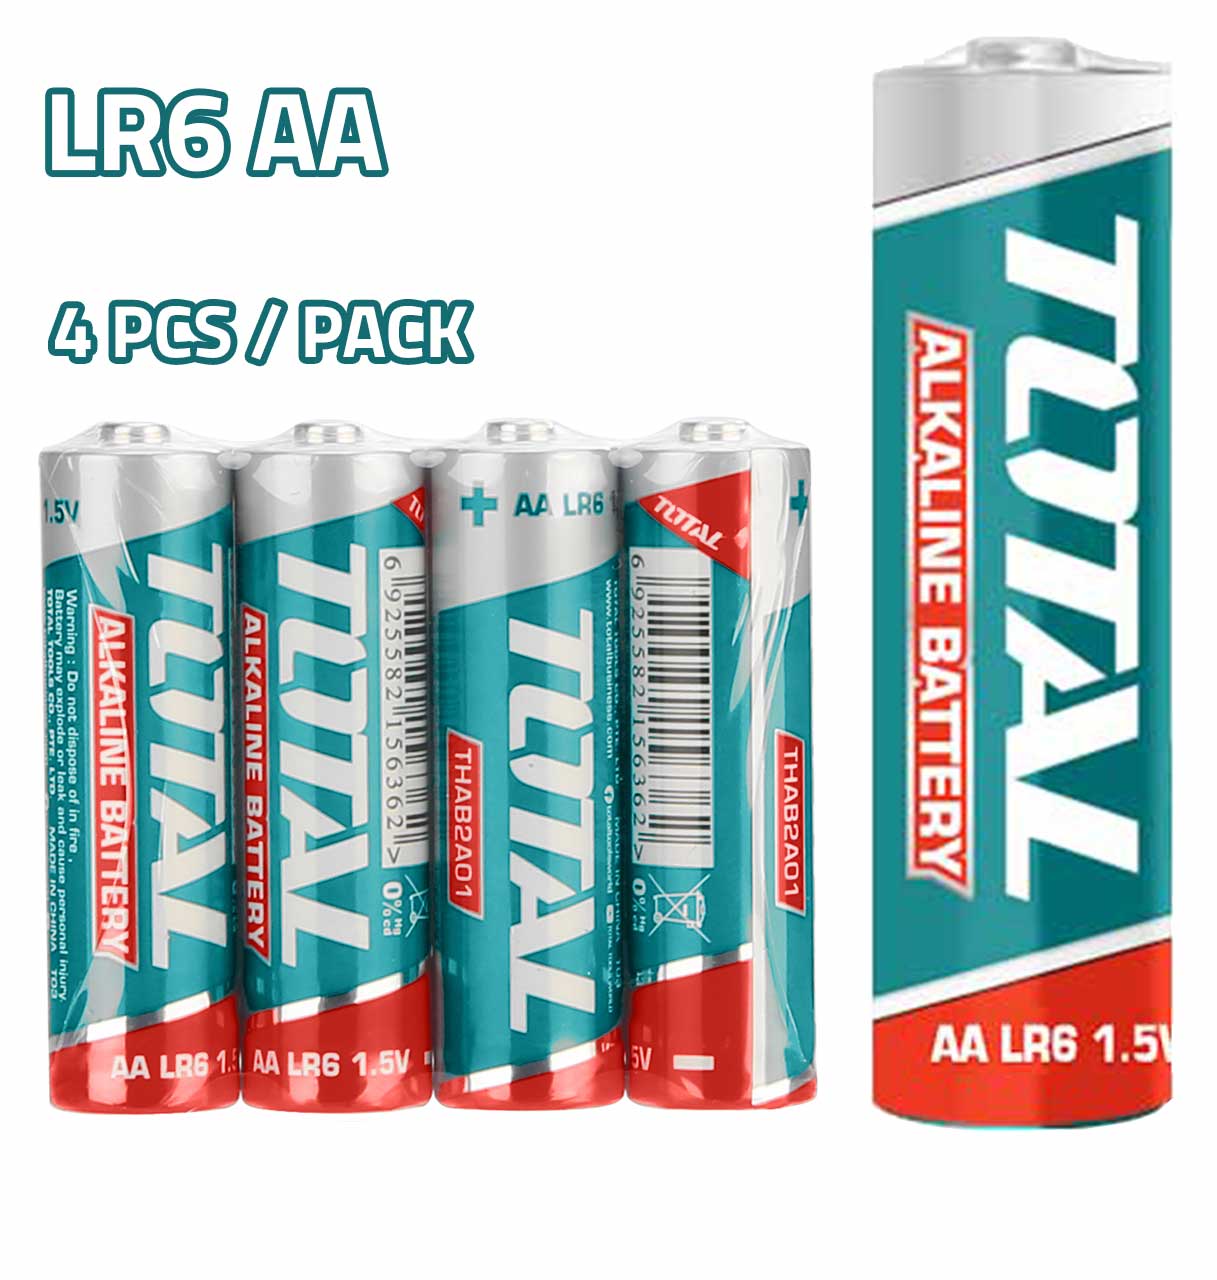 Total 4 Pieces 1.5V LR6 AA Alkaline Battery - THAB2A01